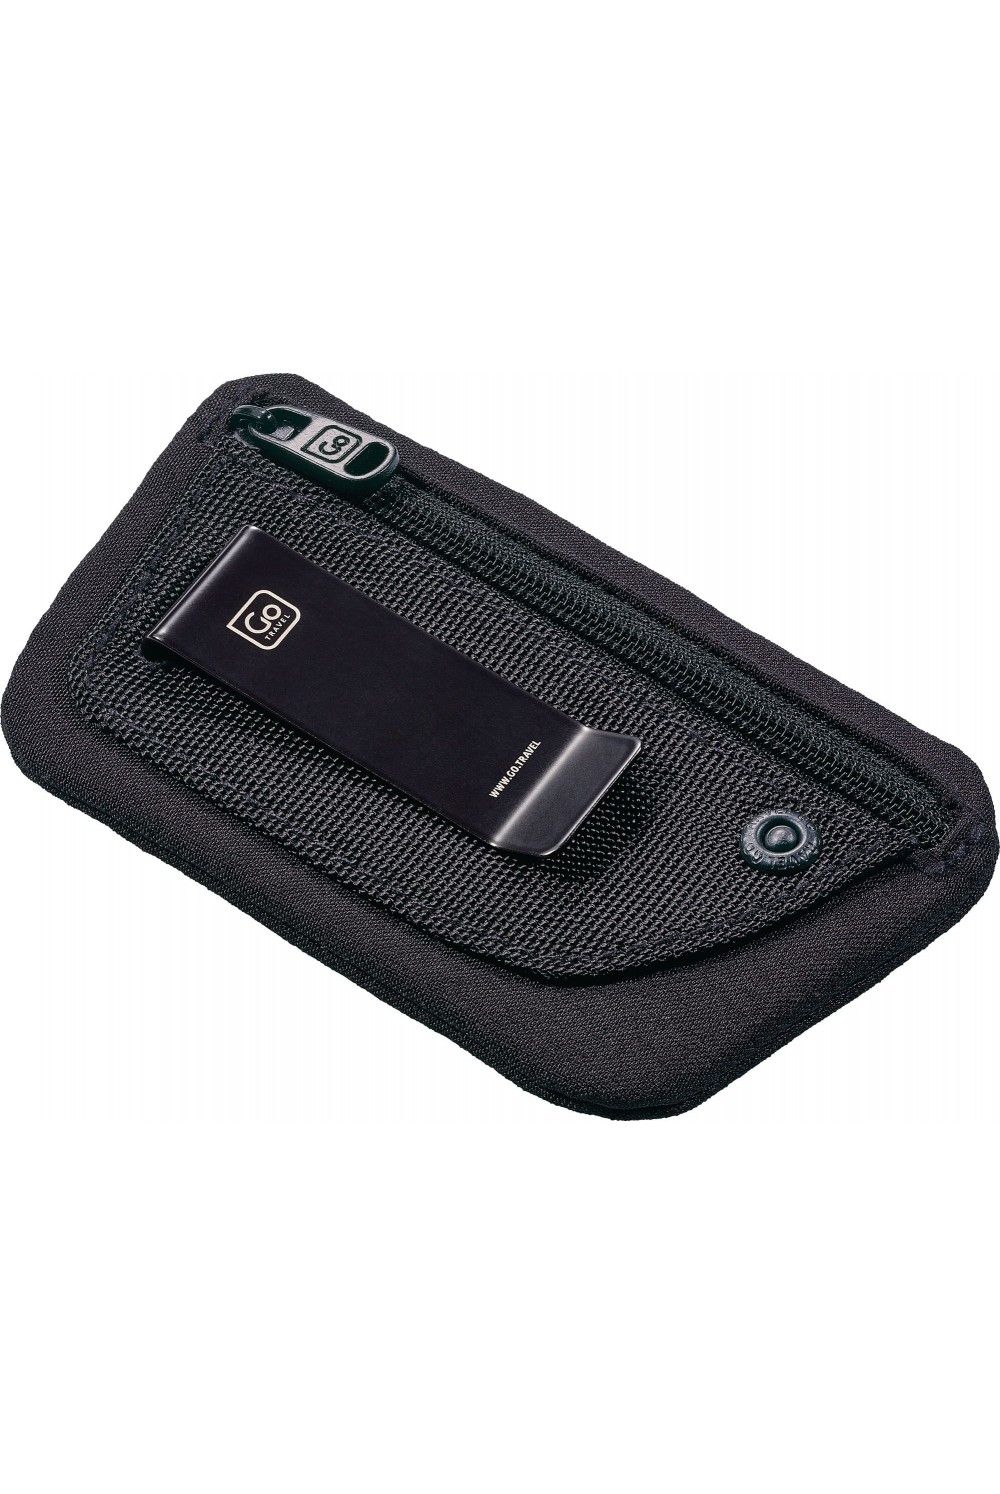 Go Travel RFID travel wallet with clip